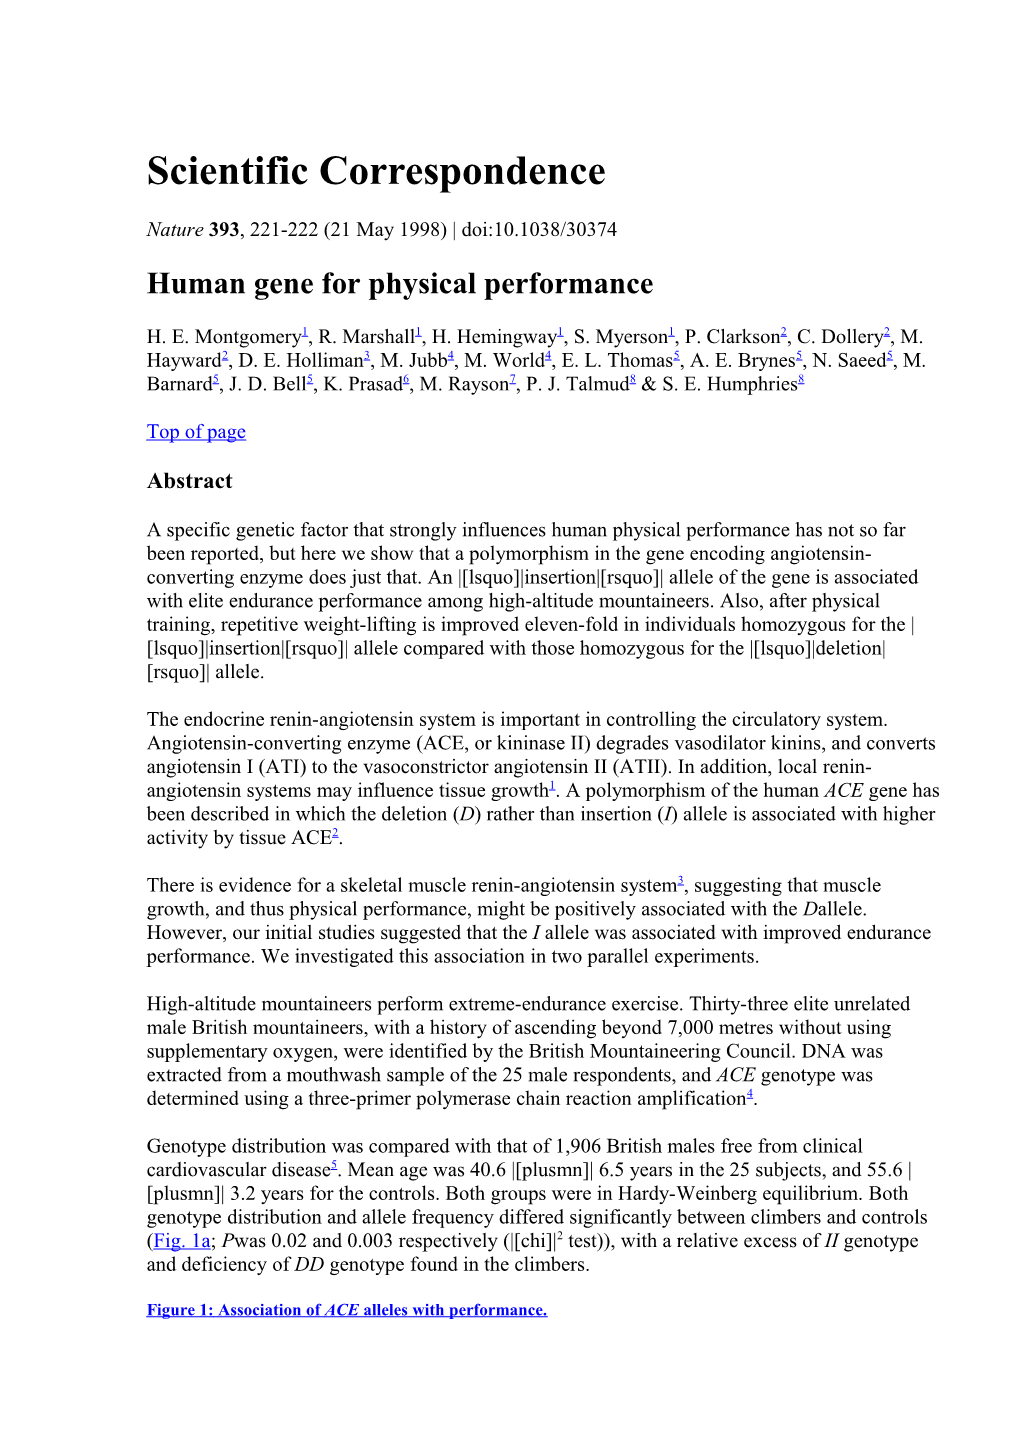 Human Gene for Physical Performance